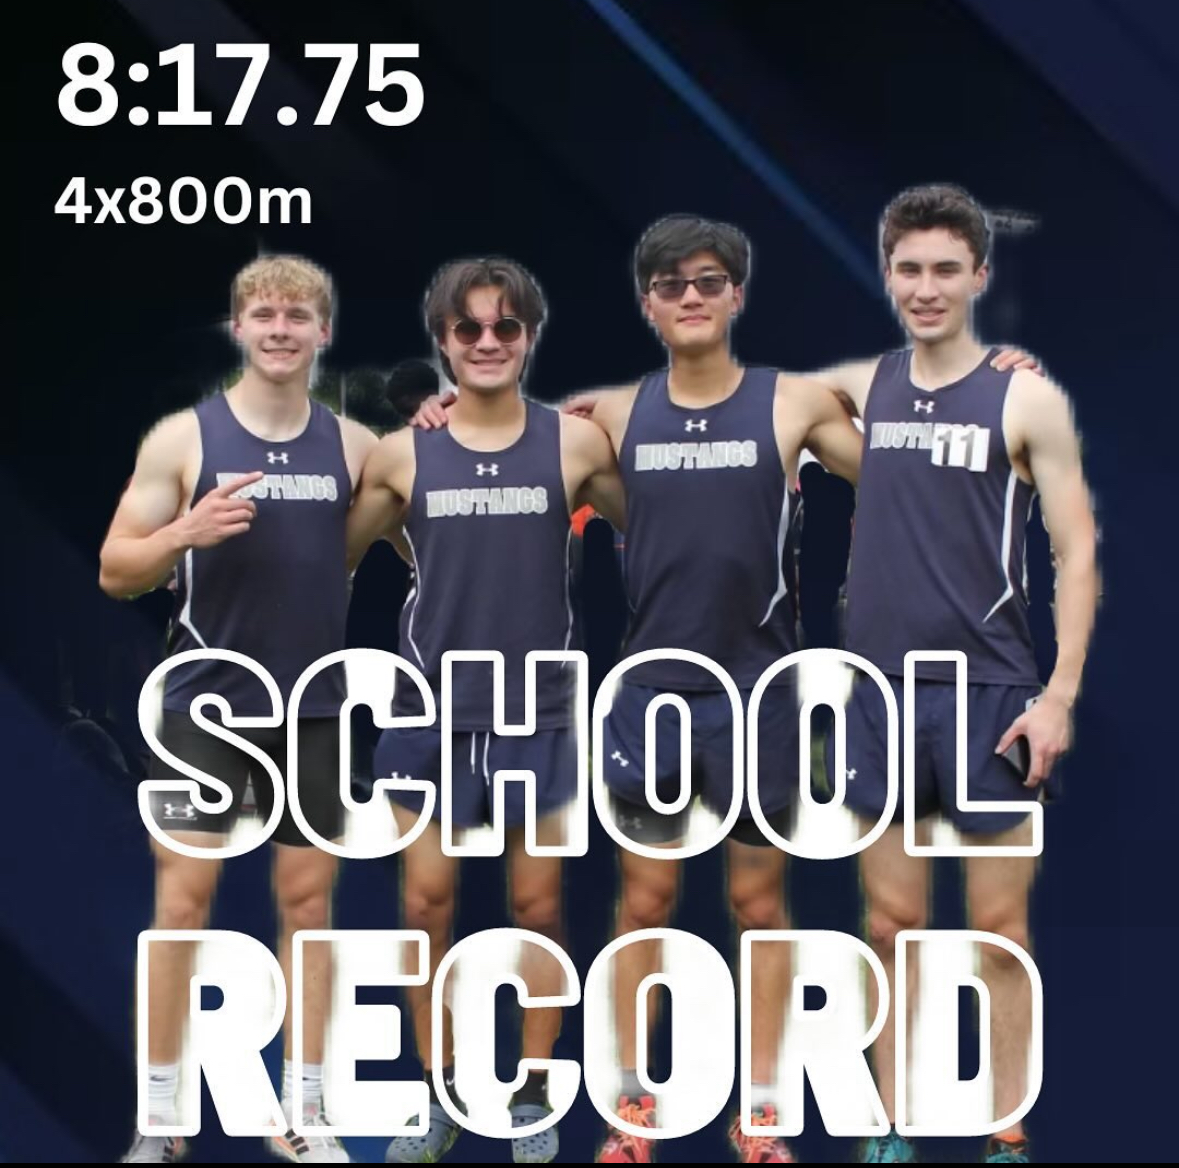 All Athletes Welcome: The Future of MRHS Track